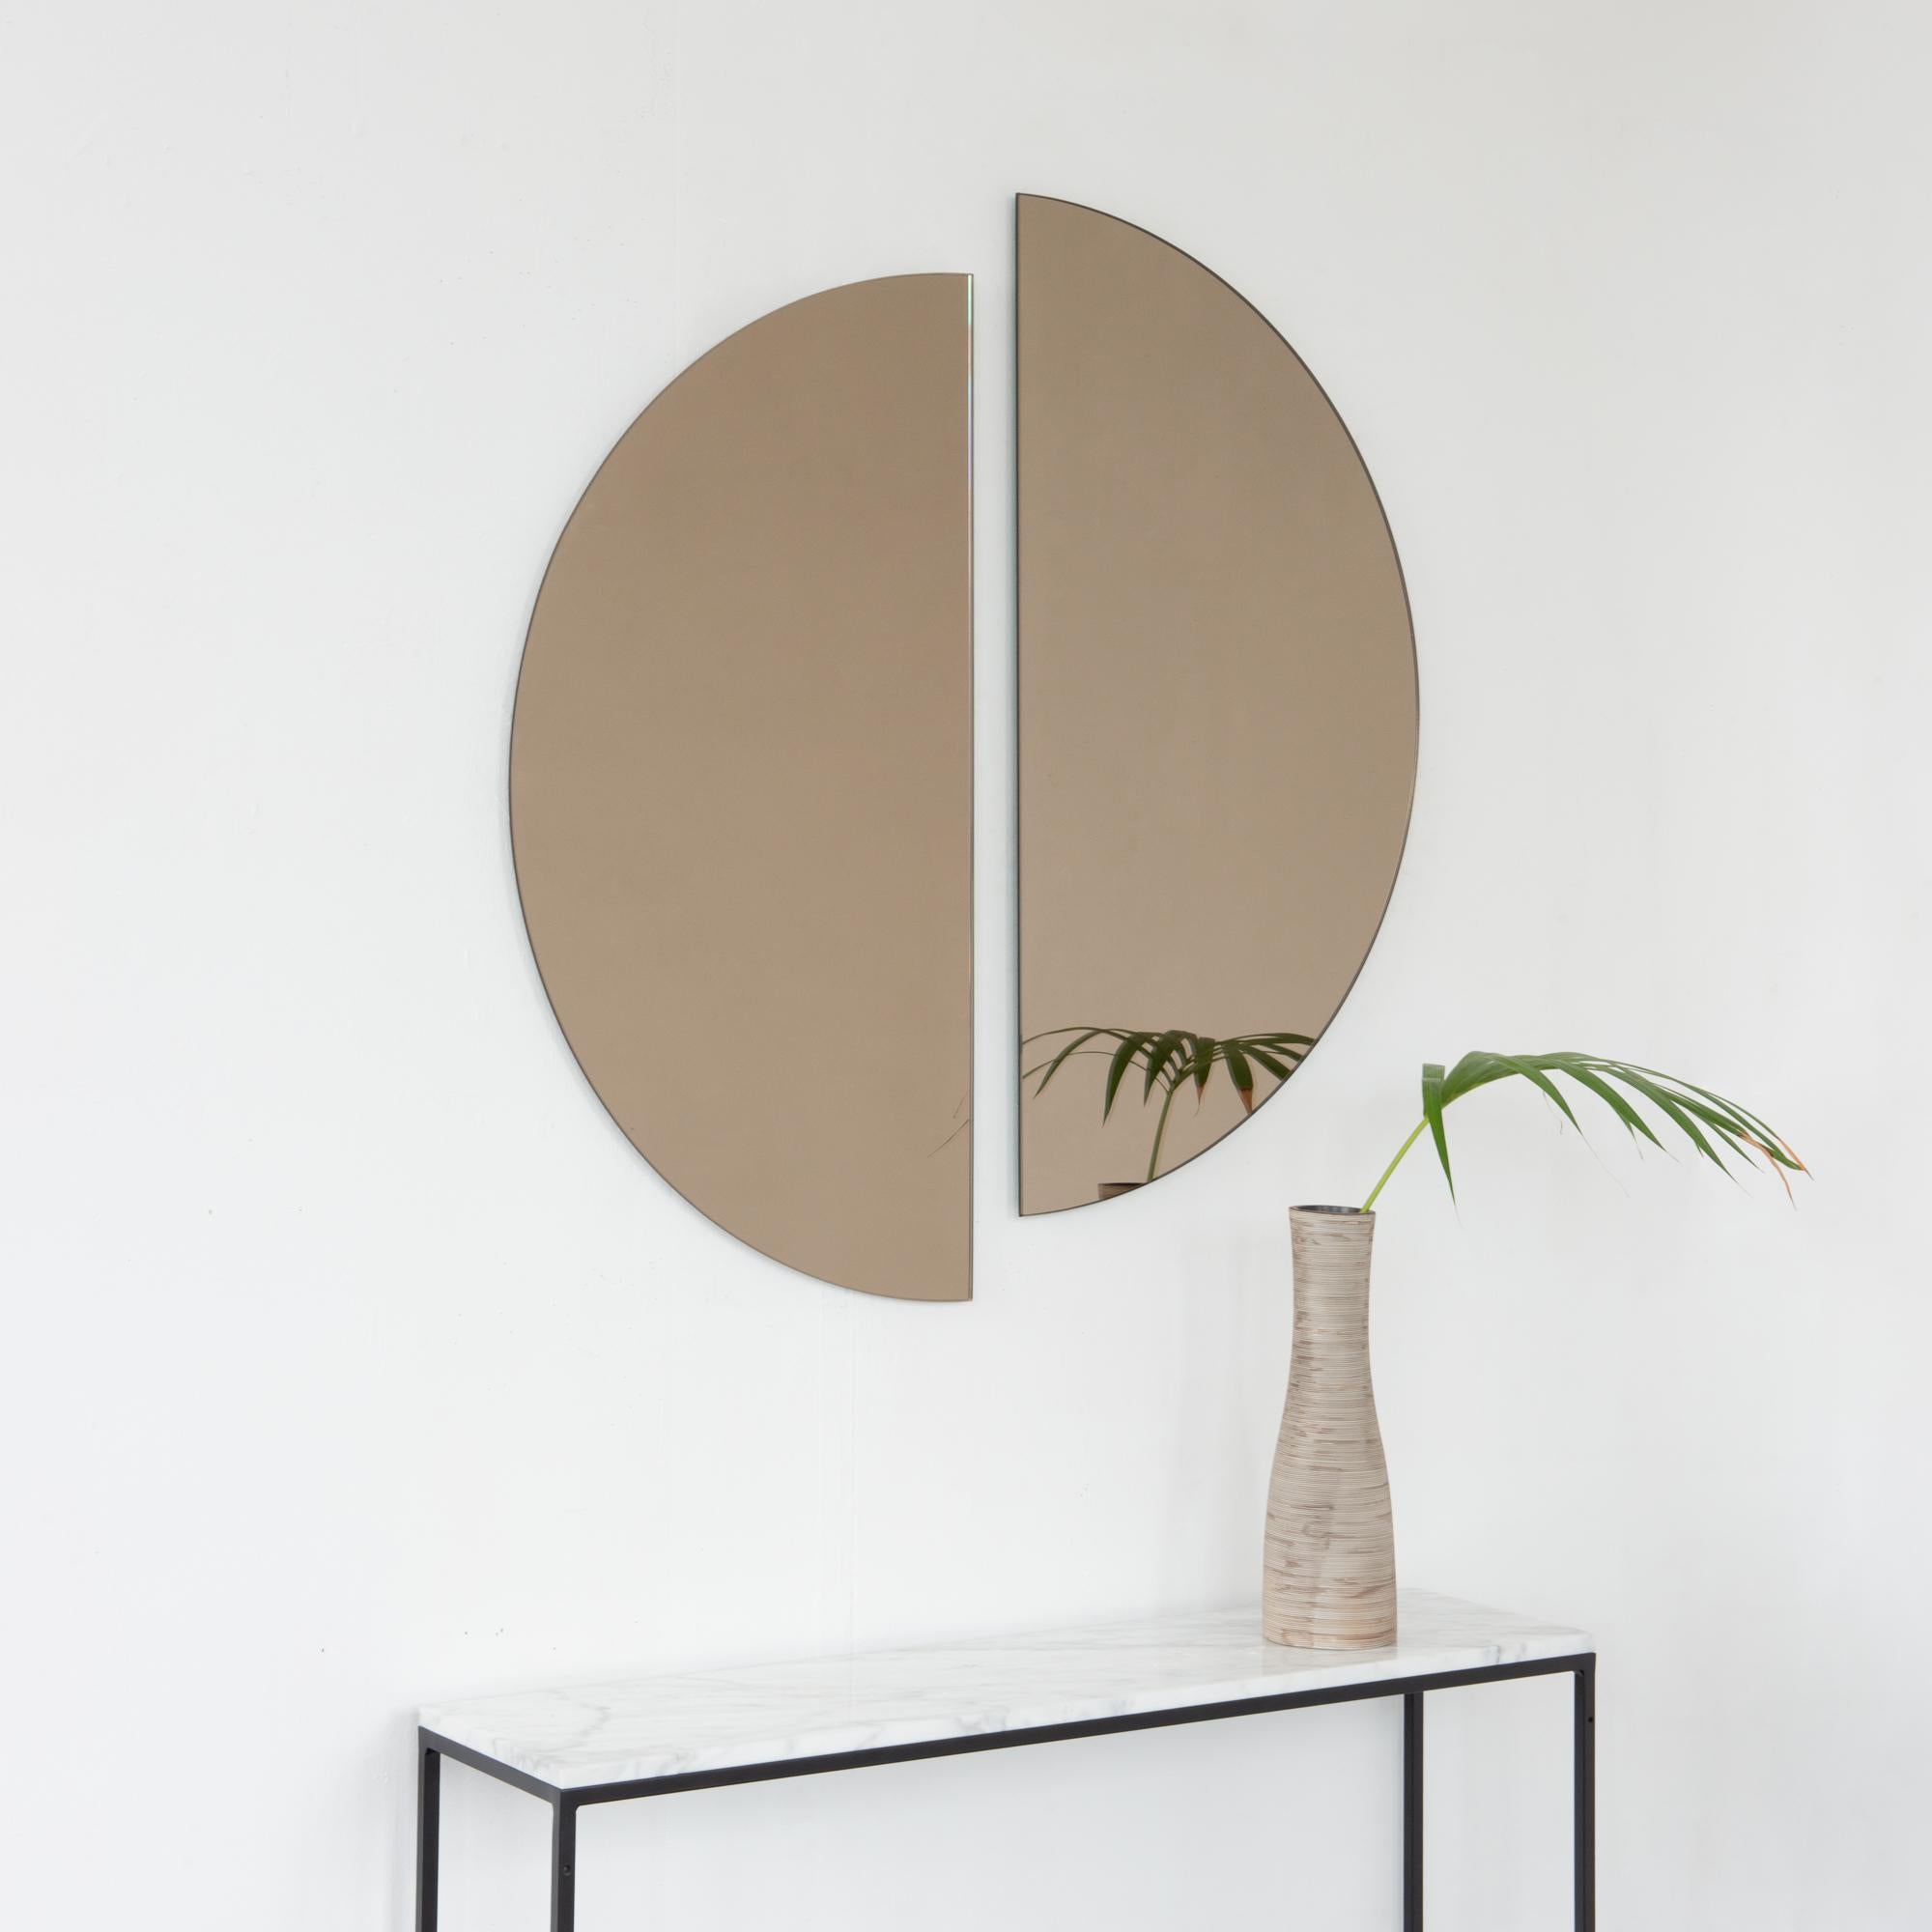 Set of two minimalist half-moon Luna™ bronze tinted frameless mirrors with a floating effect. Fitted with a quality and ingenious hanging system for a flexible installation in 4 different directions. Designed and made in London, UK. 

The backing